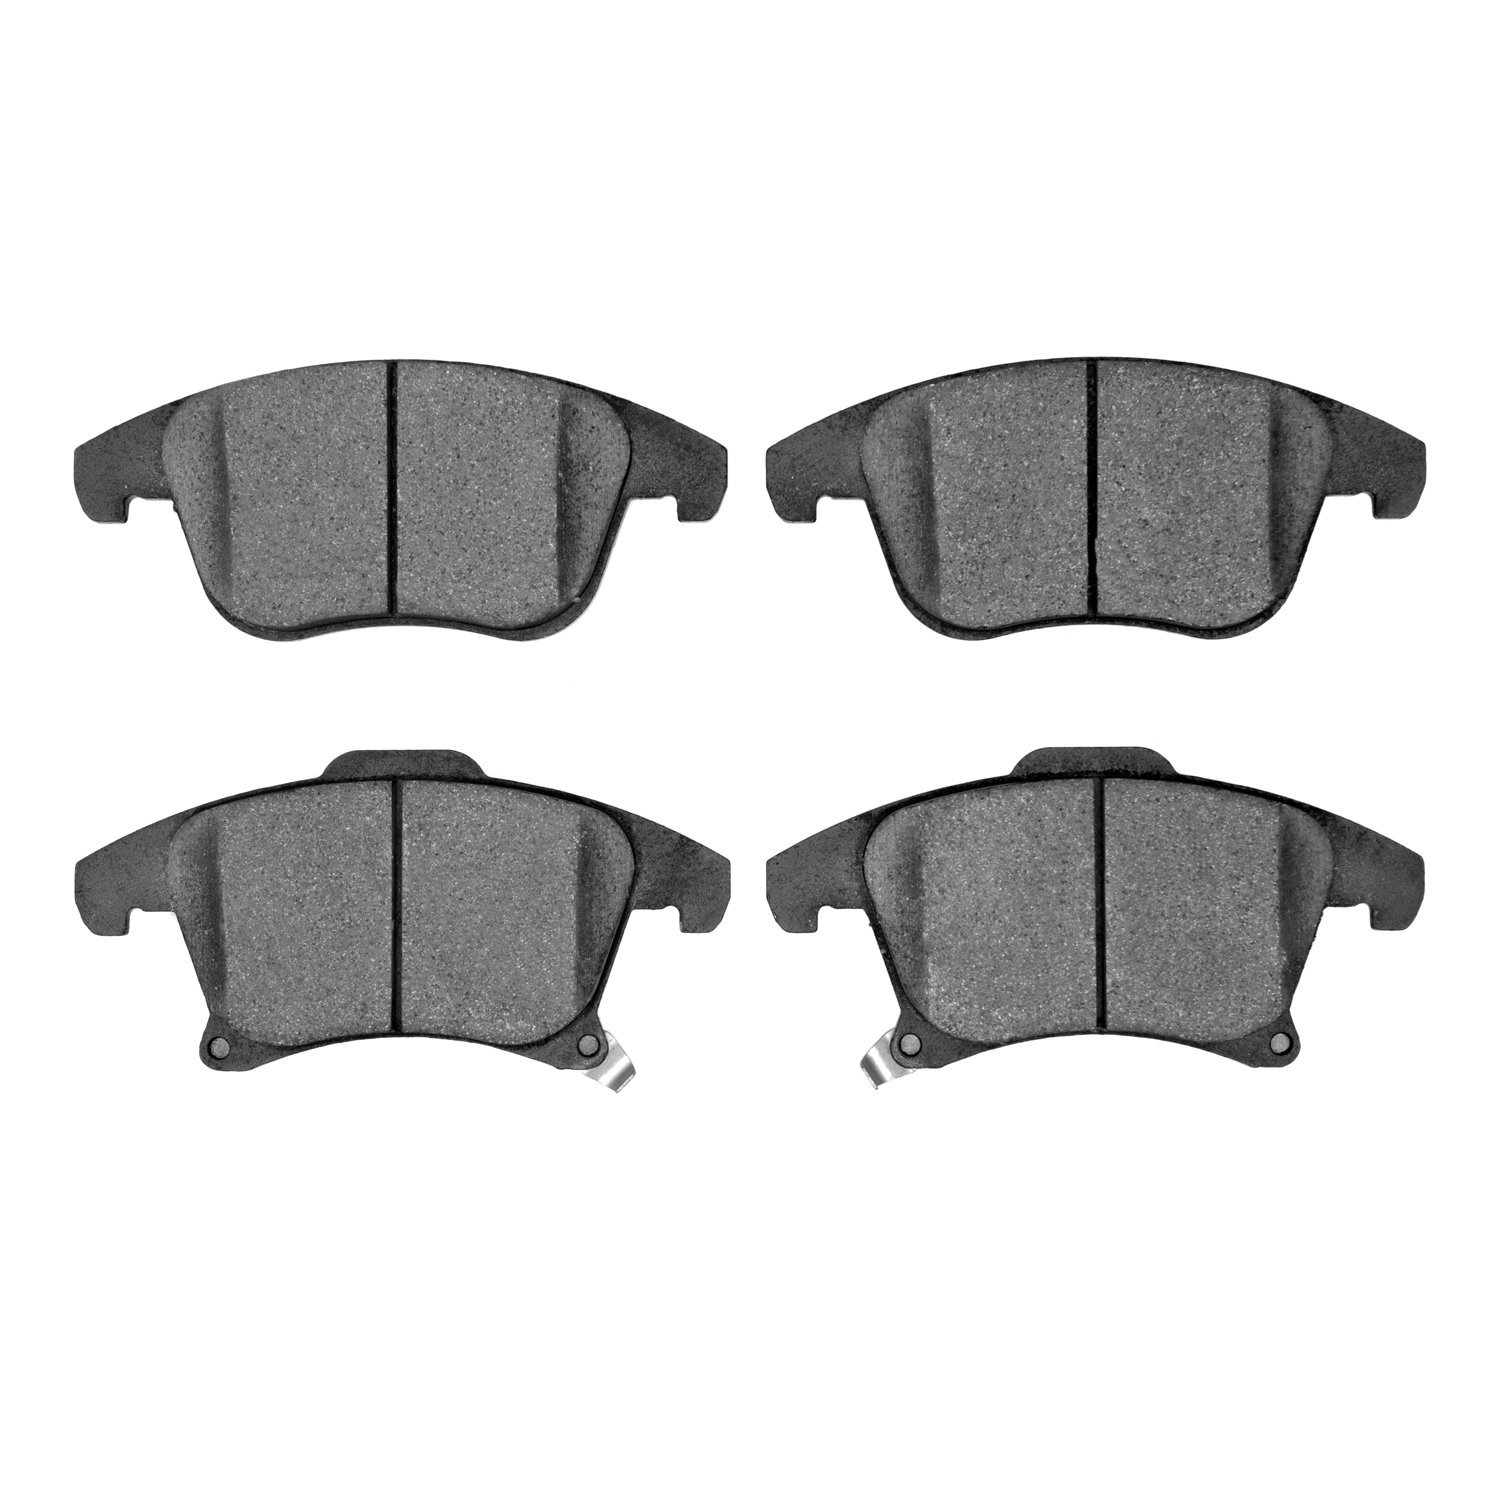 1310-1653-00 3000-Series Ceramic Brake Pads, 2013-2020 Ford/Lincoln/Mercury/Mazda, Position: Front